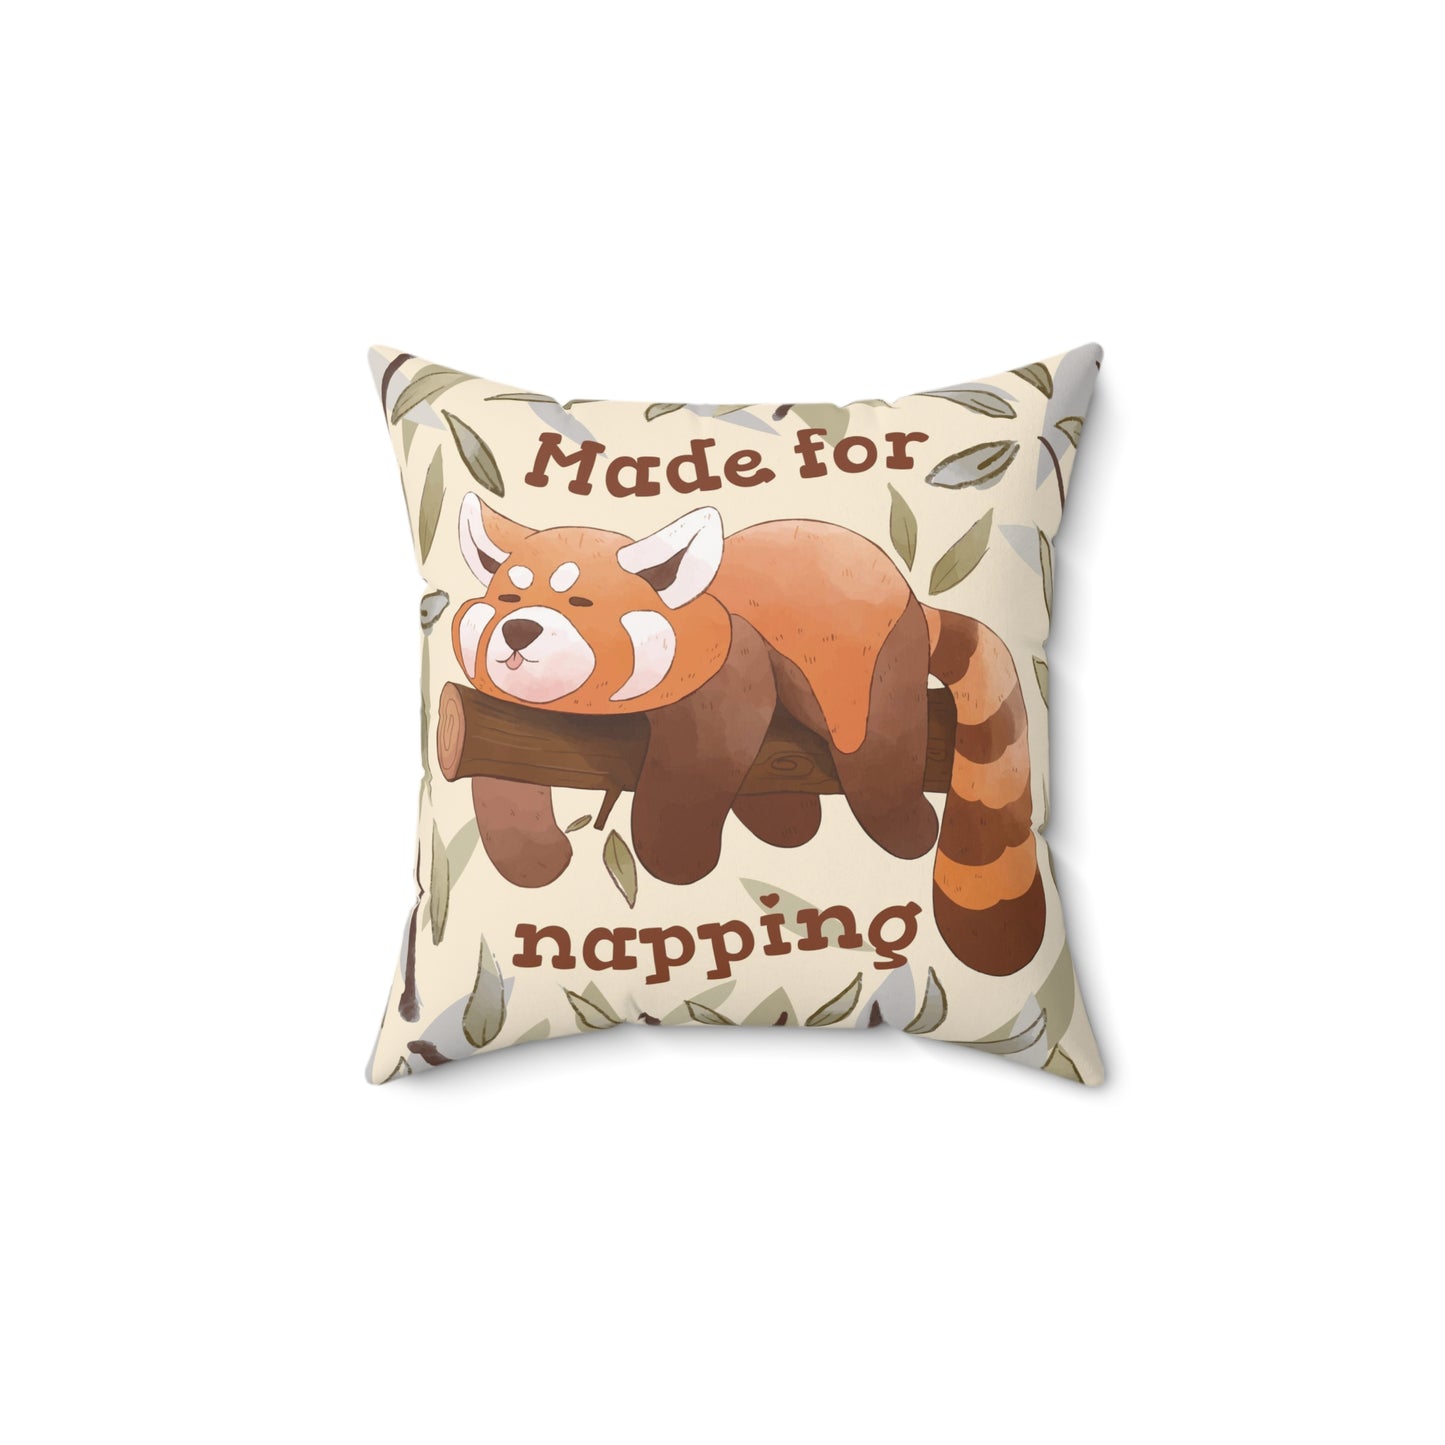 Red Panda - Made for Napping Square Pillow